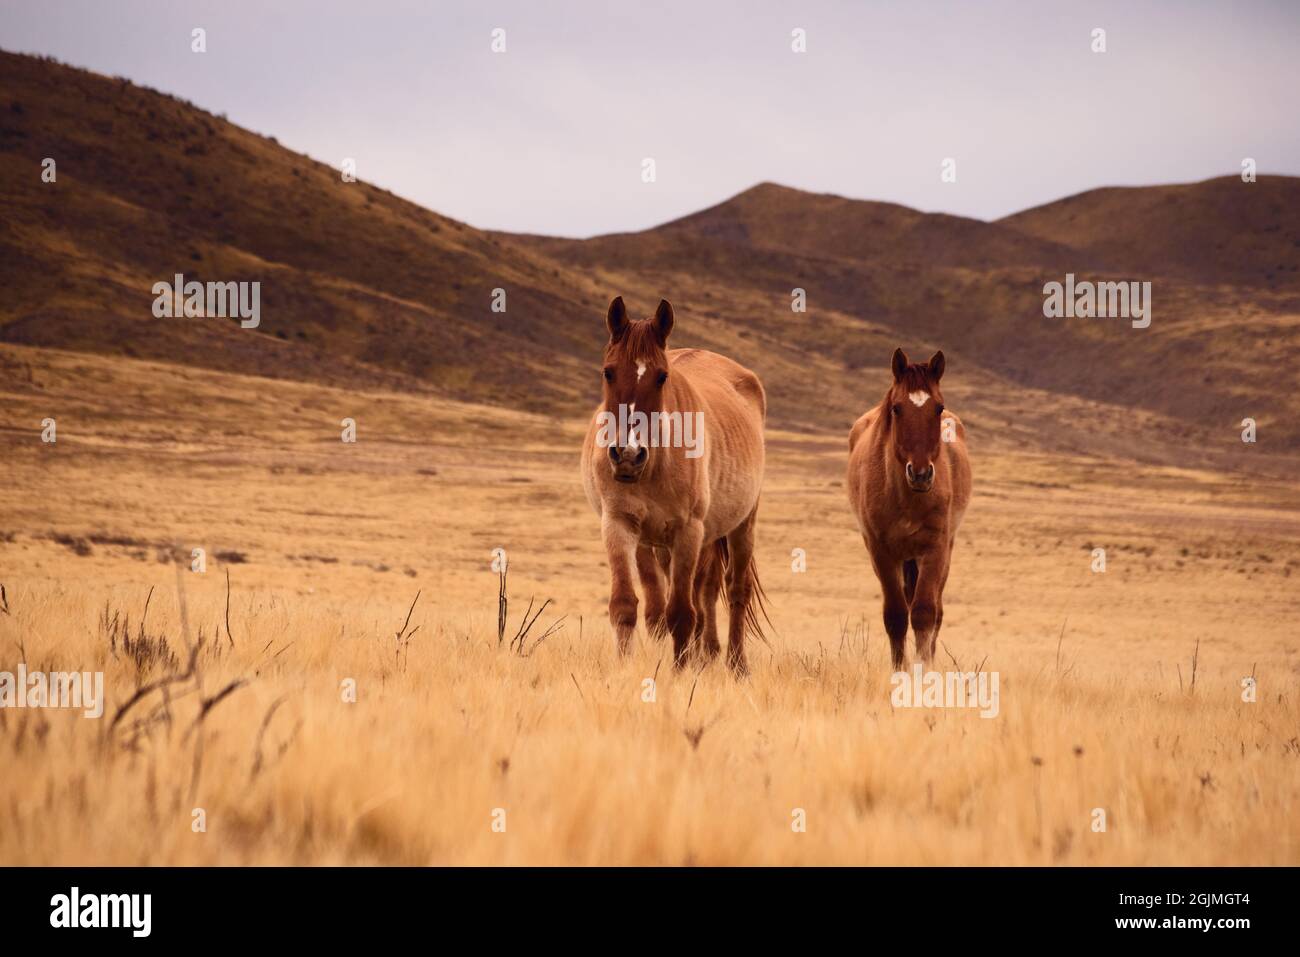 Free roaming horses walking across a dry, cold grassland in Valle de Uco, Mendoza, Argentina. Stock Photo